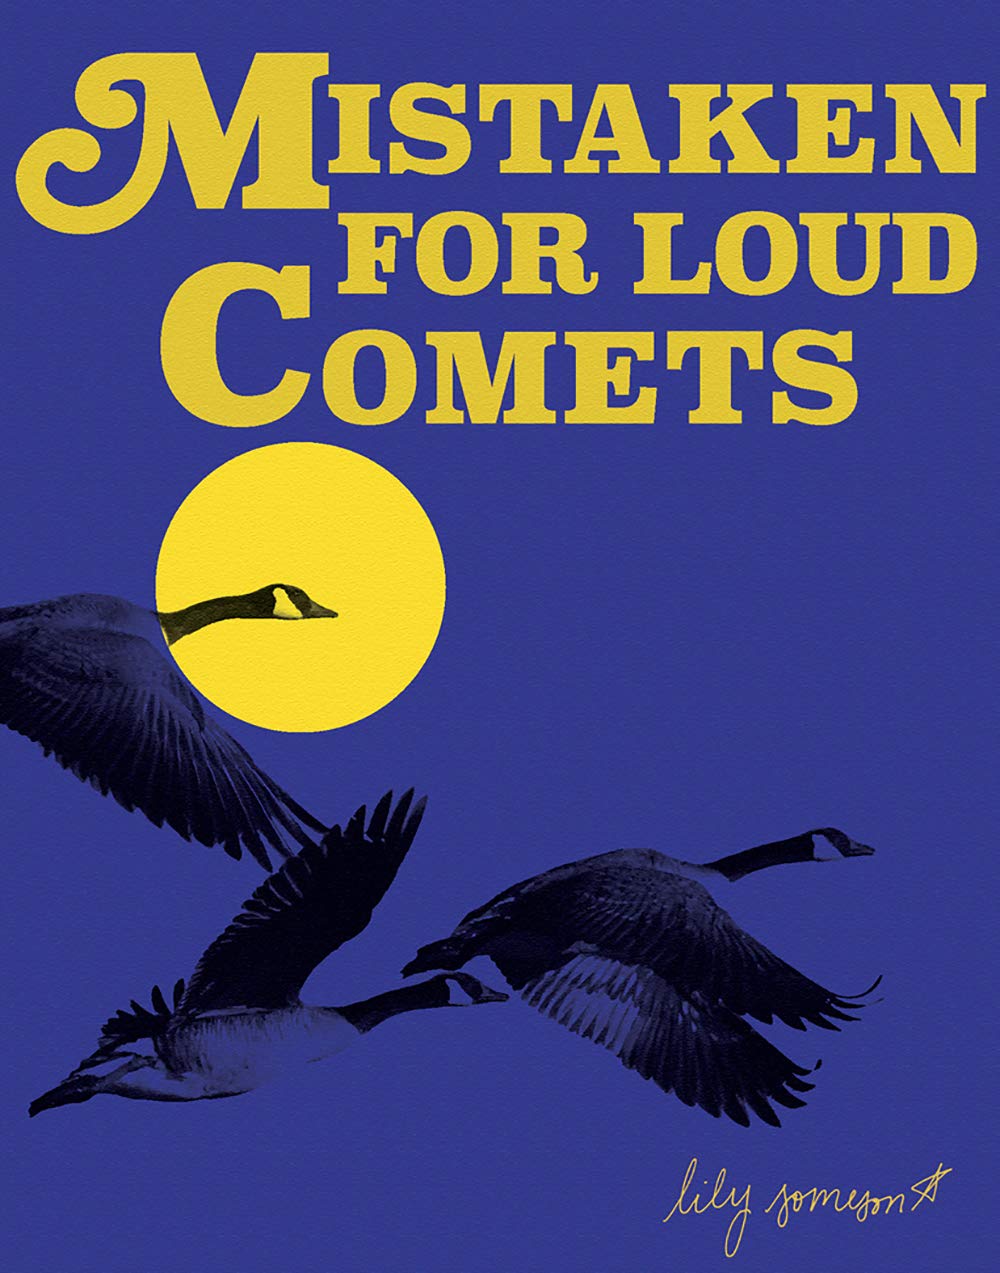 Mistaken for Loud Comets, by Lily Someson